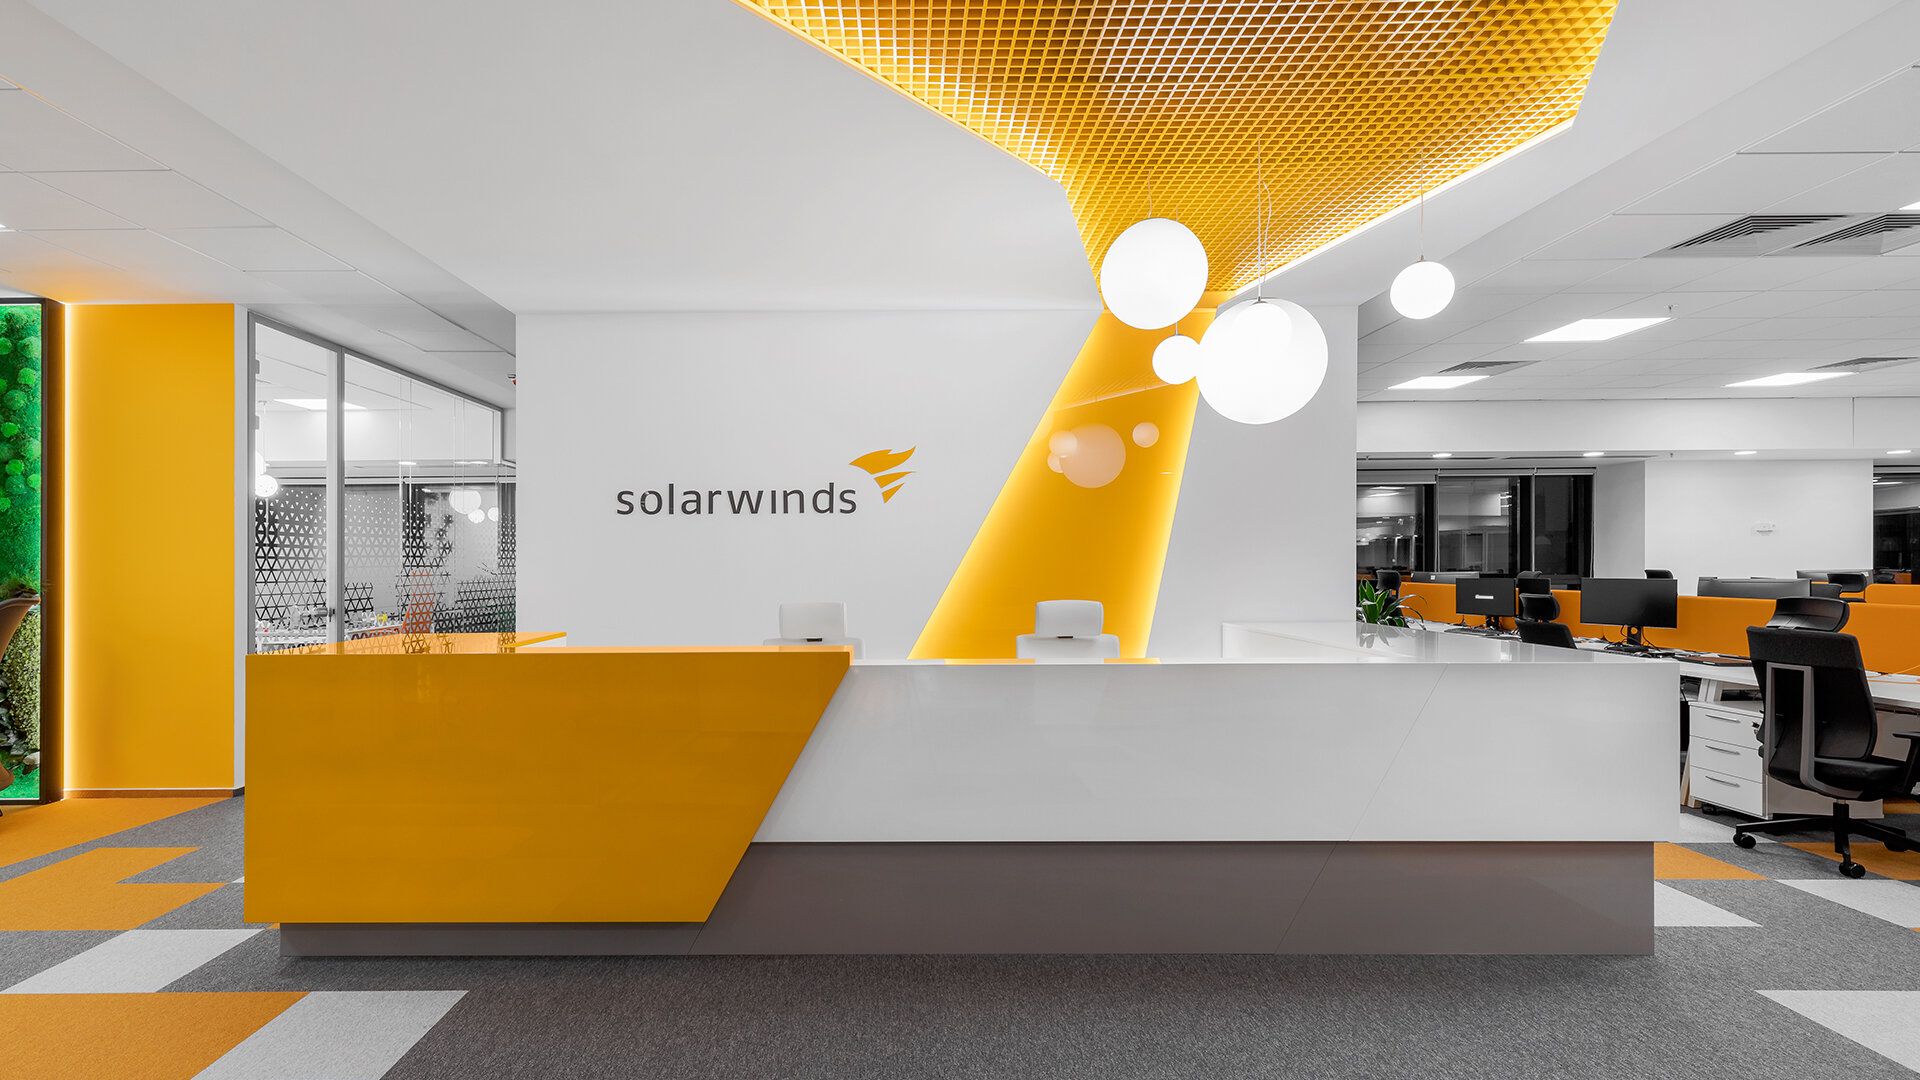 Solarwinds offices